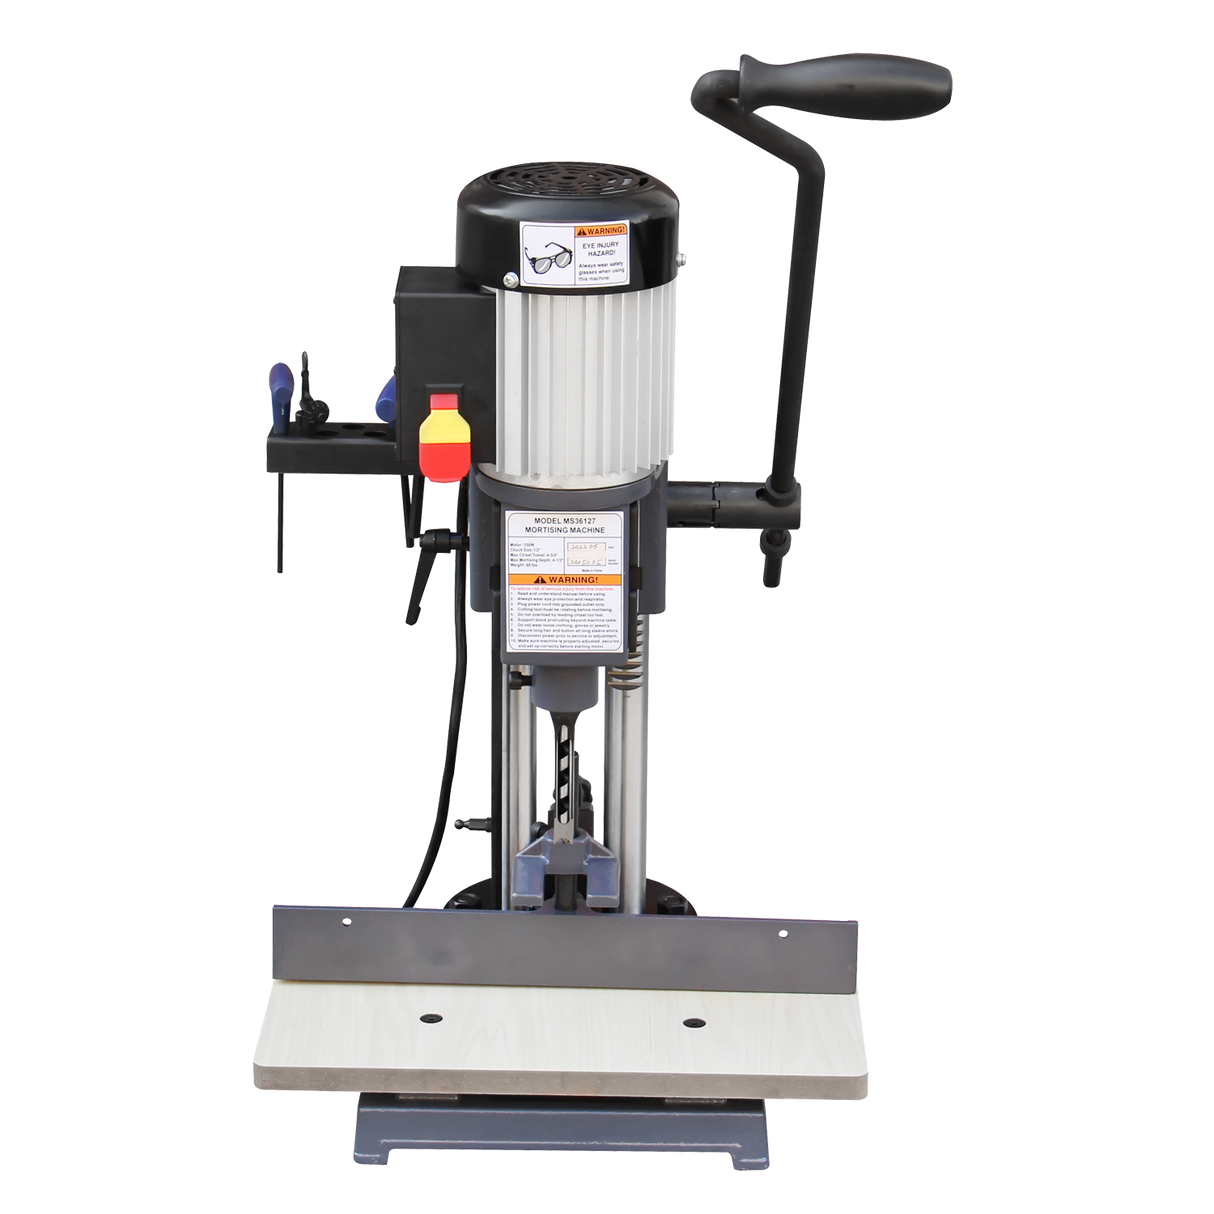 Kang Industrial MS-36127 Heavy-Duty Mortising Machine, 3/4HP WoodWorking Machine